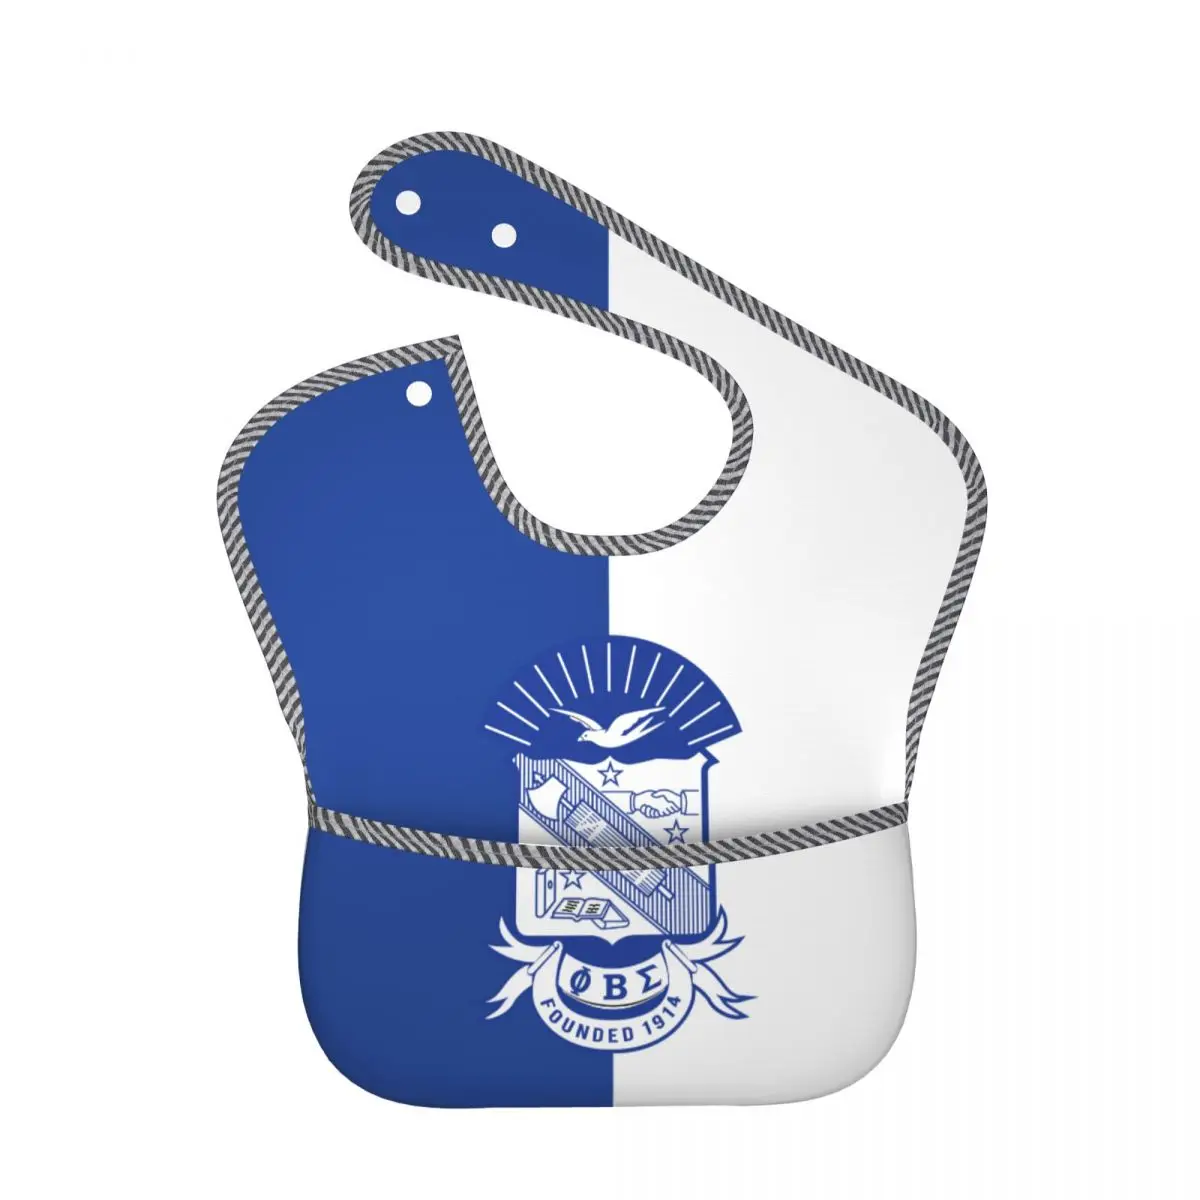 

Phi Beta Sigma PBS Fraternity Baby Bibs for Baby Boy or Girl, Adjustable Bib Baby and Toddler Bib for Eating, Waterproof Fabric